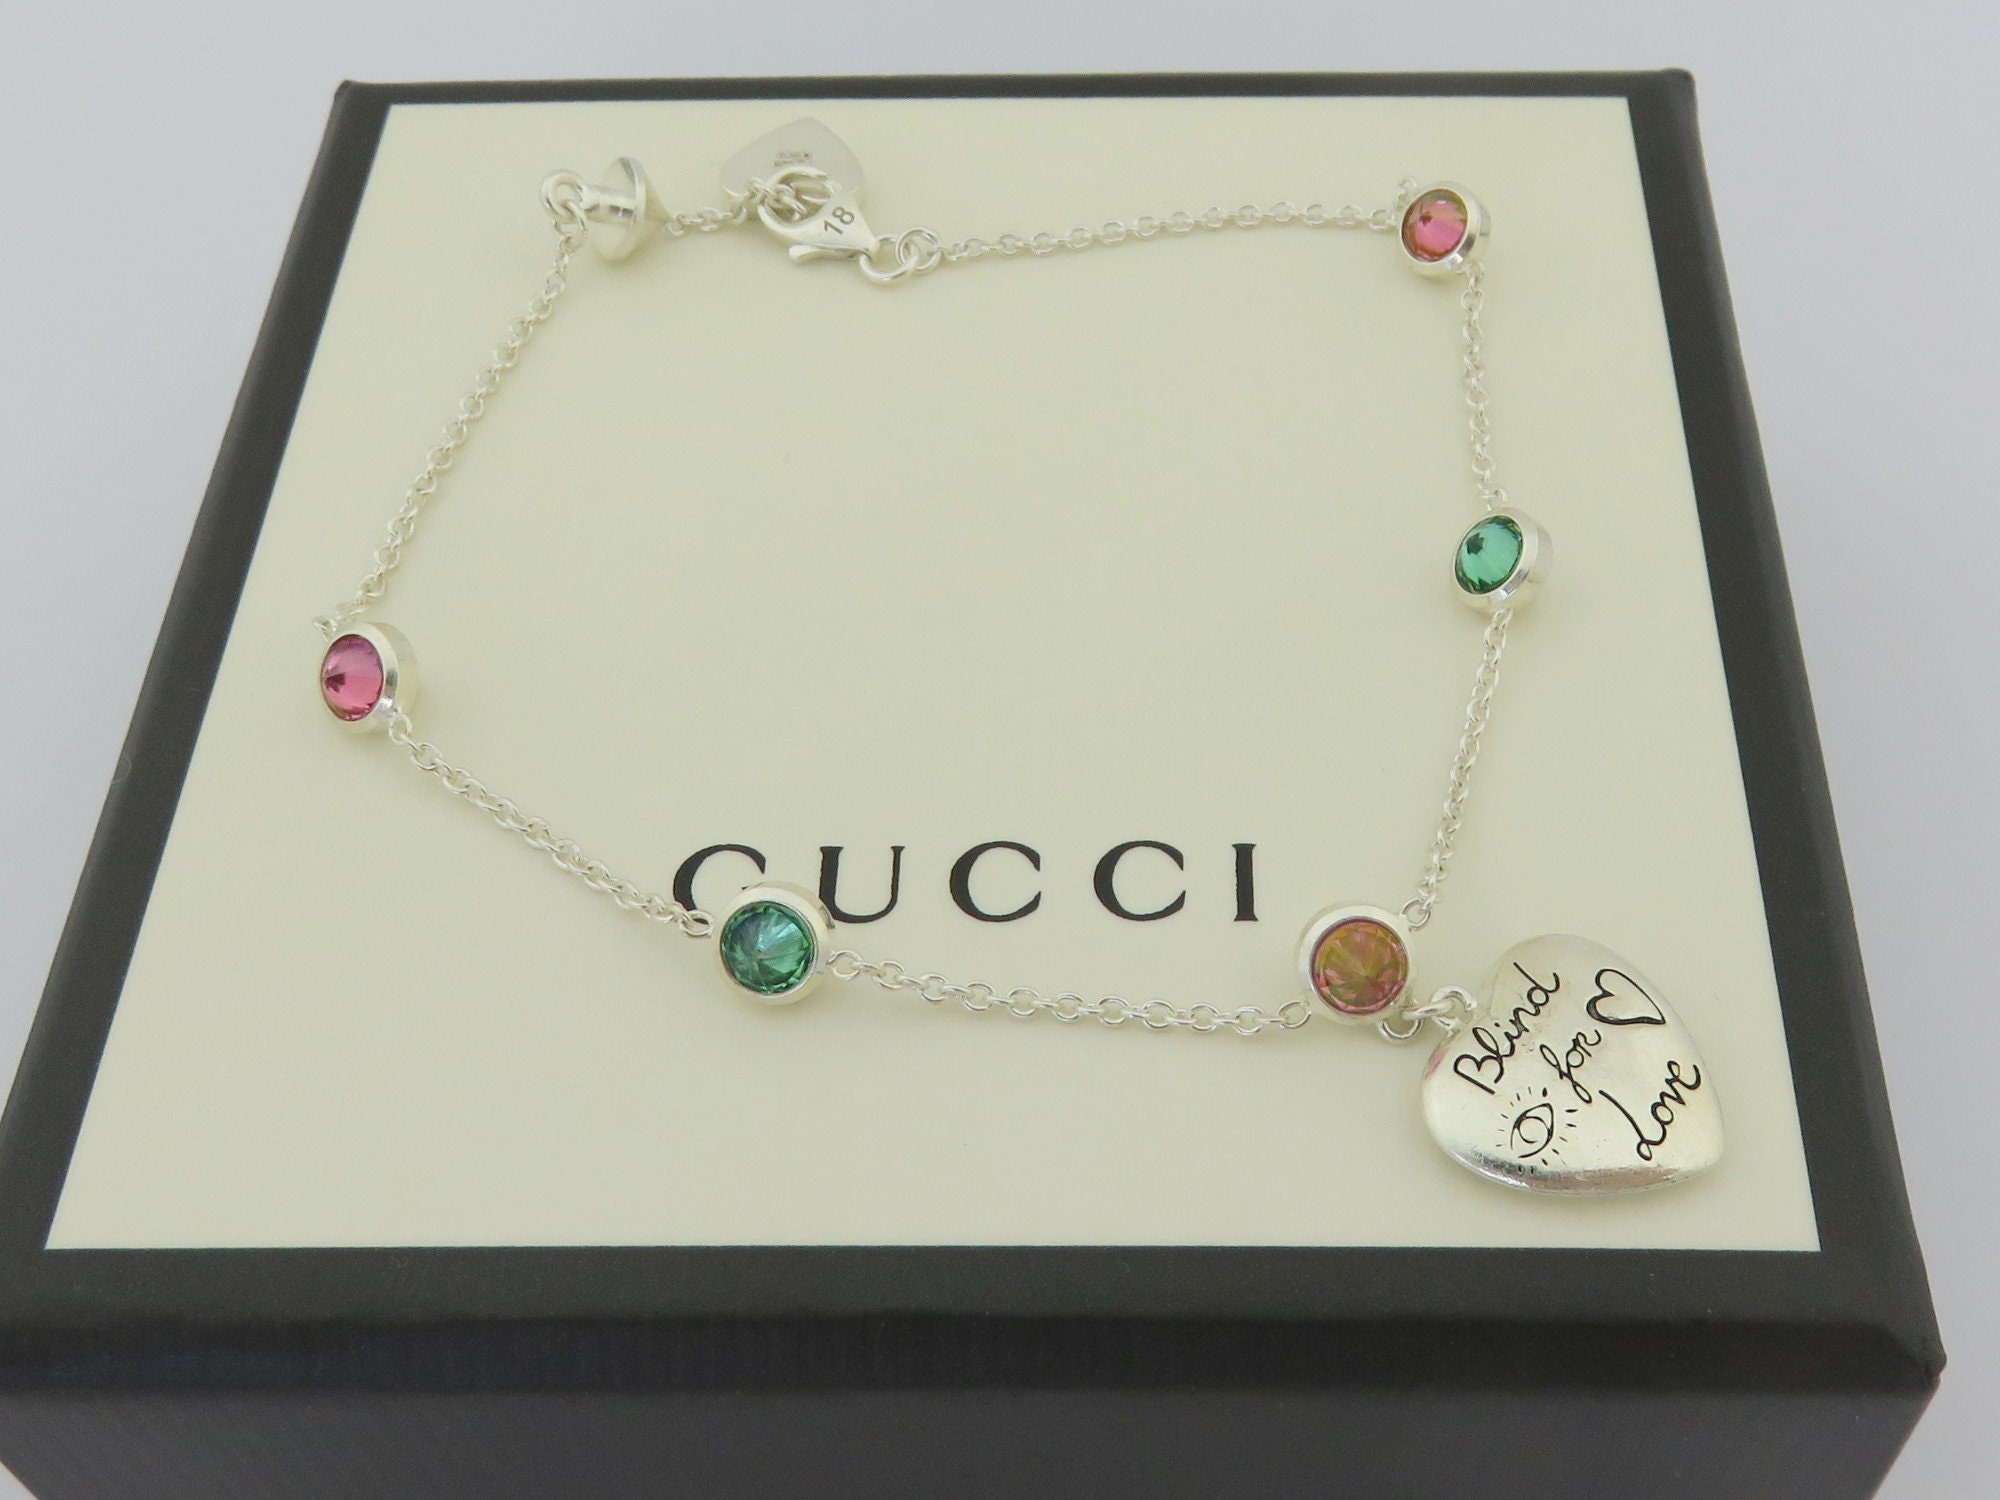 GUCCI Blind for Love Necklace With Flower and Bird Silver Pendant | eBay